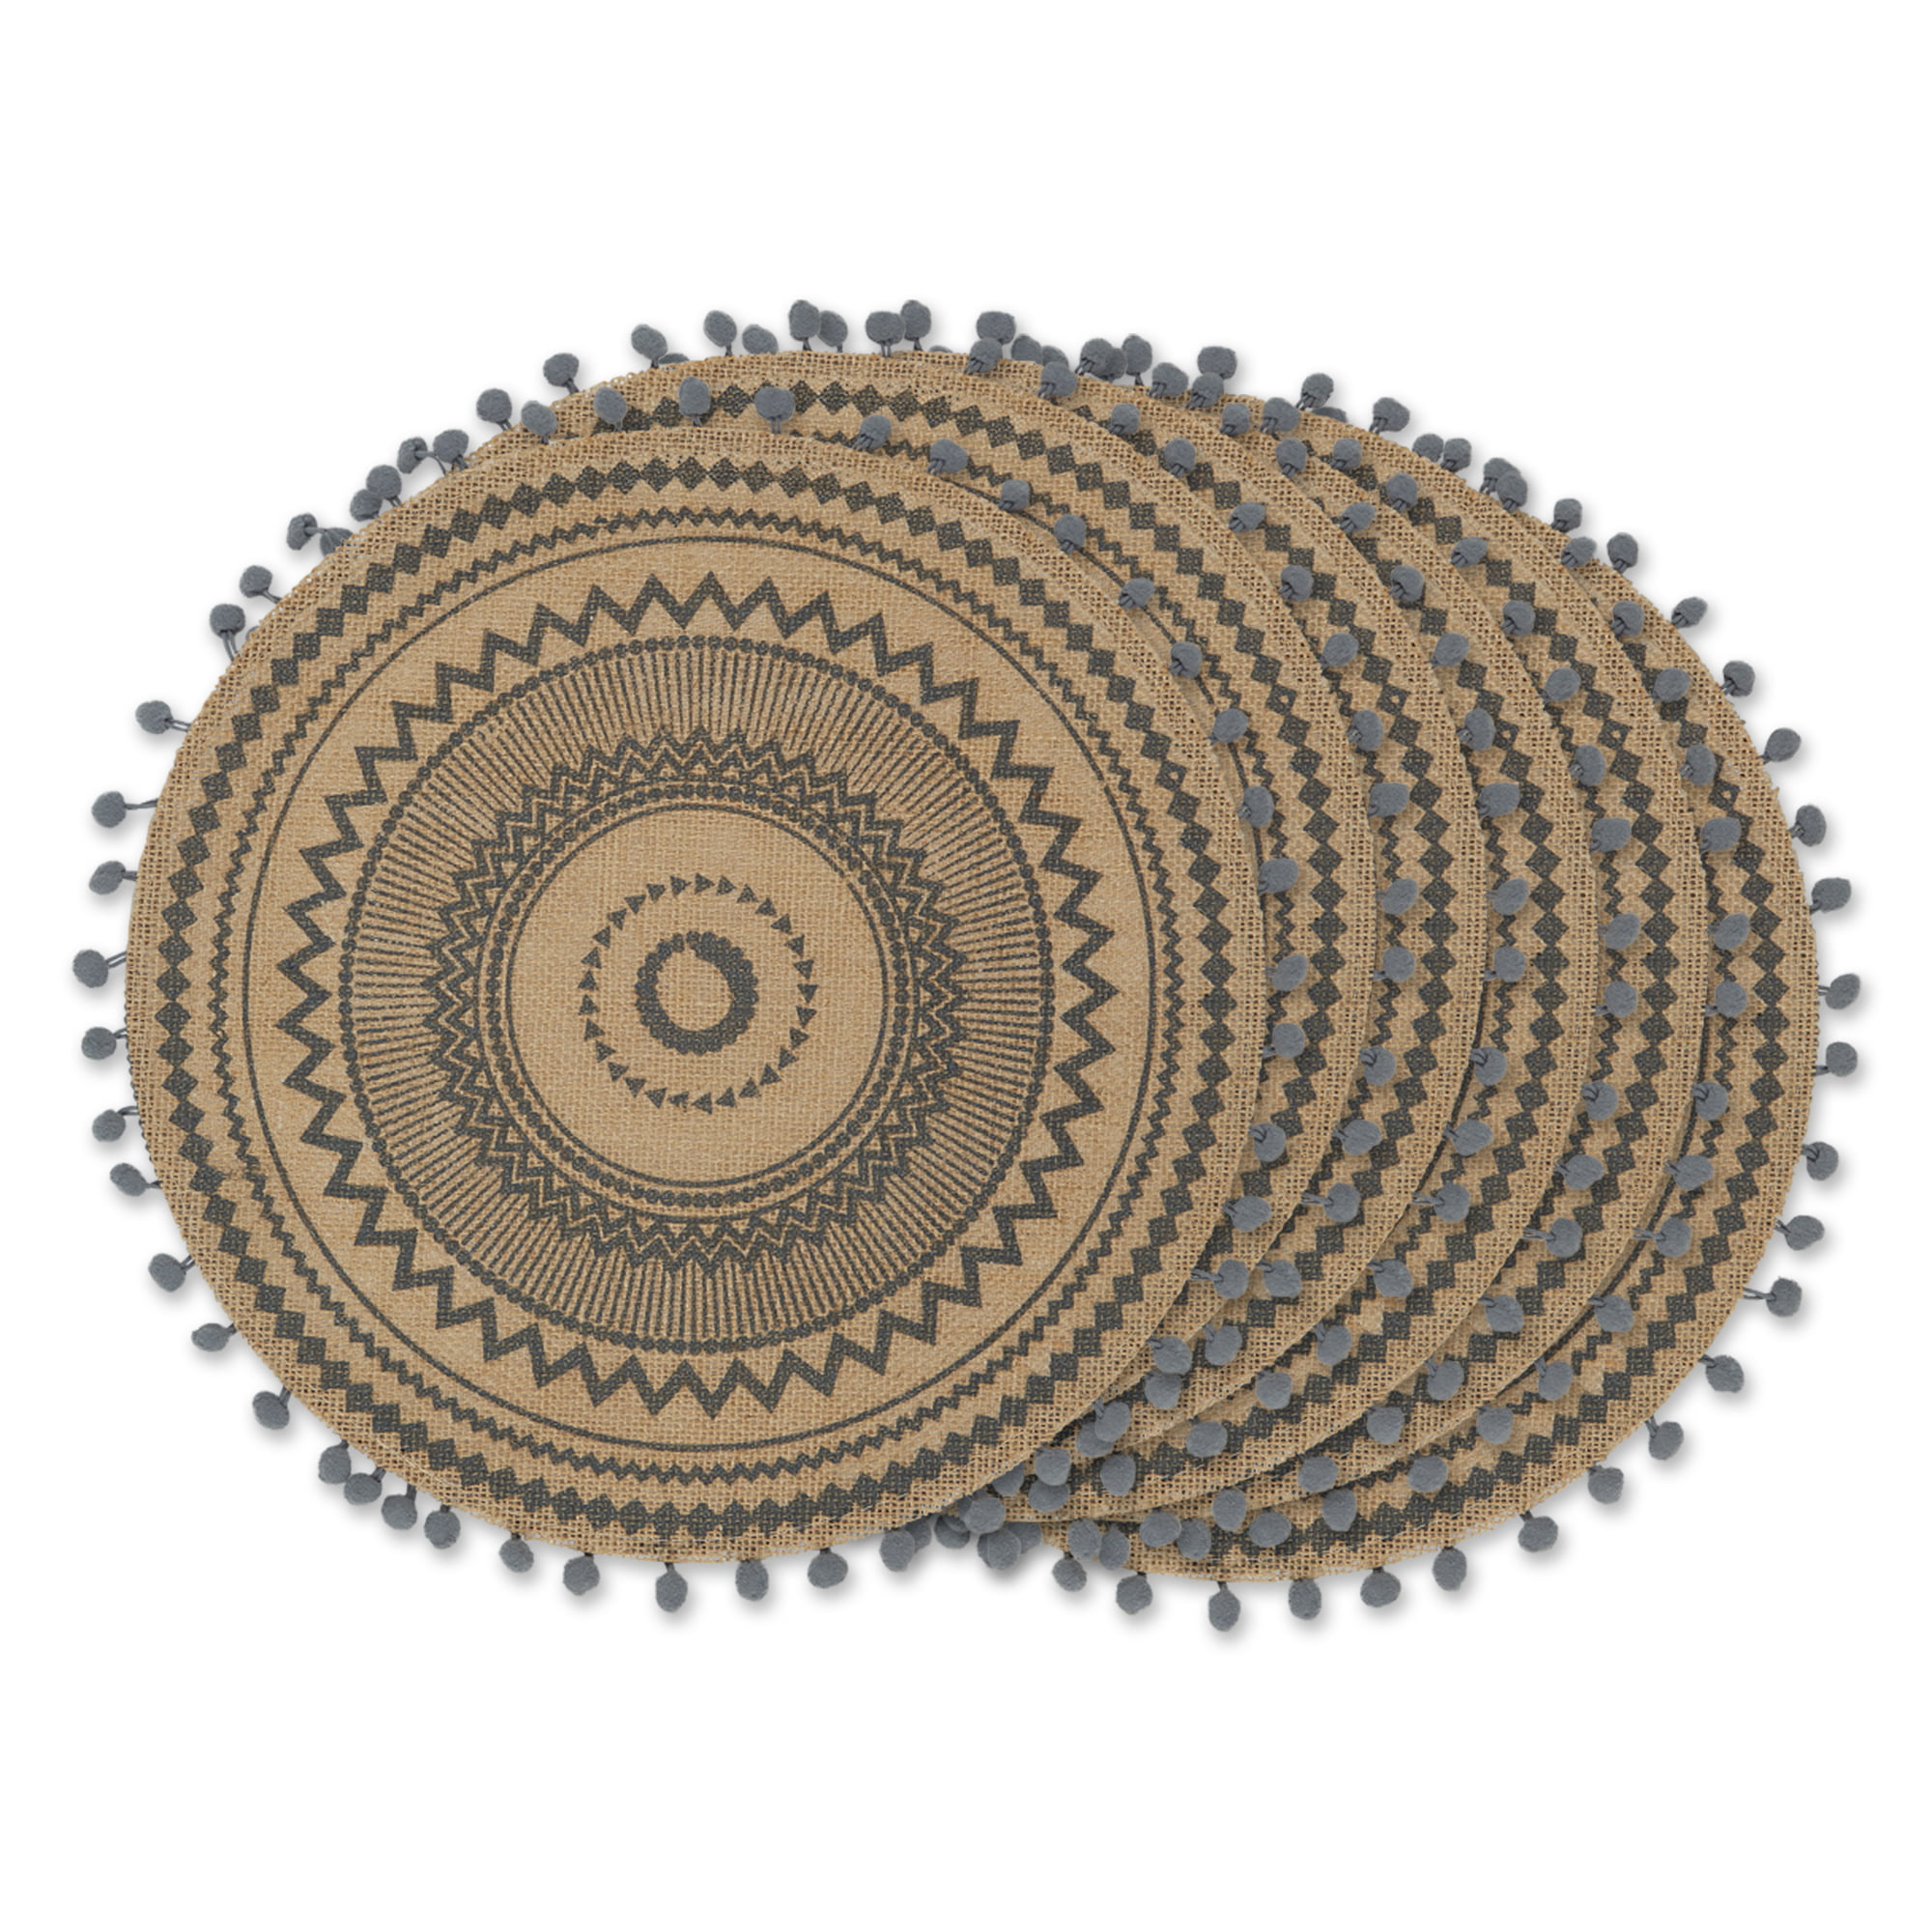 Home·FSN Round Braided Placemats Set of 6, Water Hyacinth Weave 